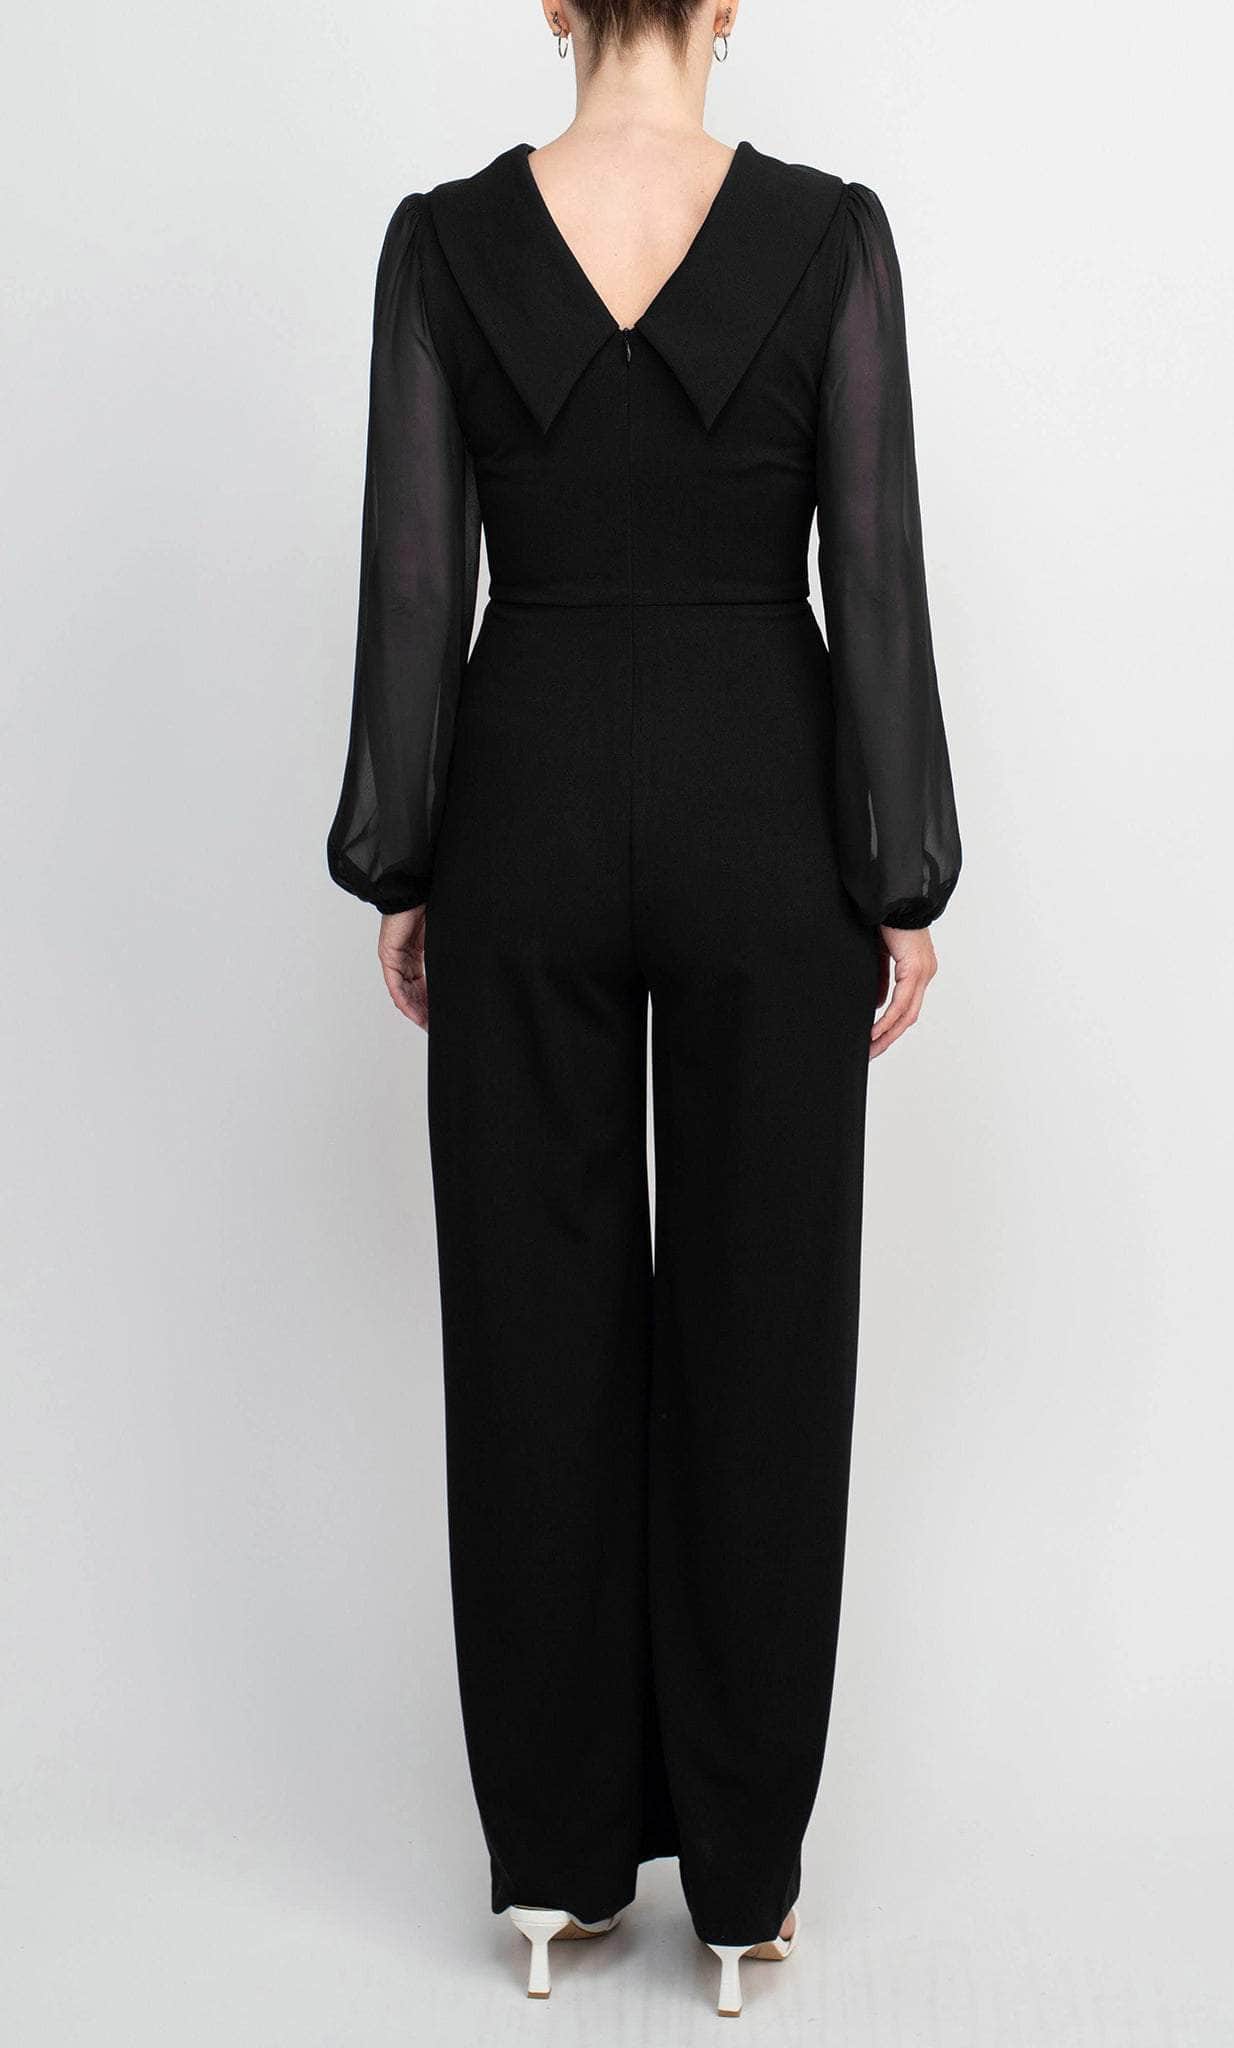 Connected Apparel TJE48312M1 - Sheer Bell Sleeve Jumpsuit Formal Pantsuits